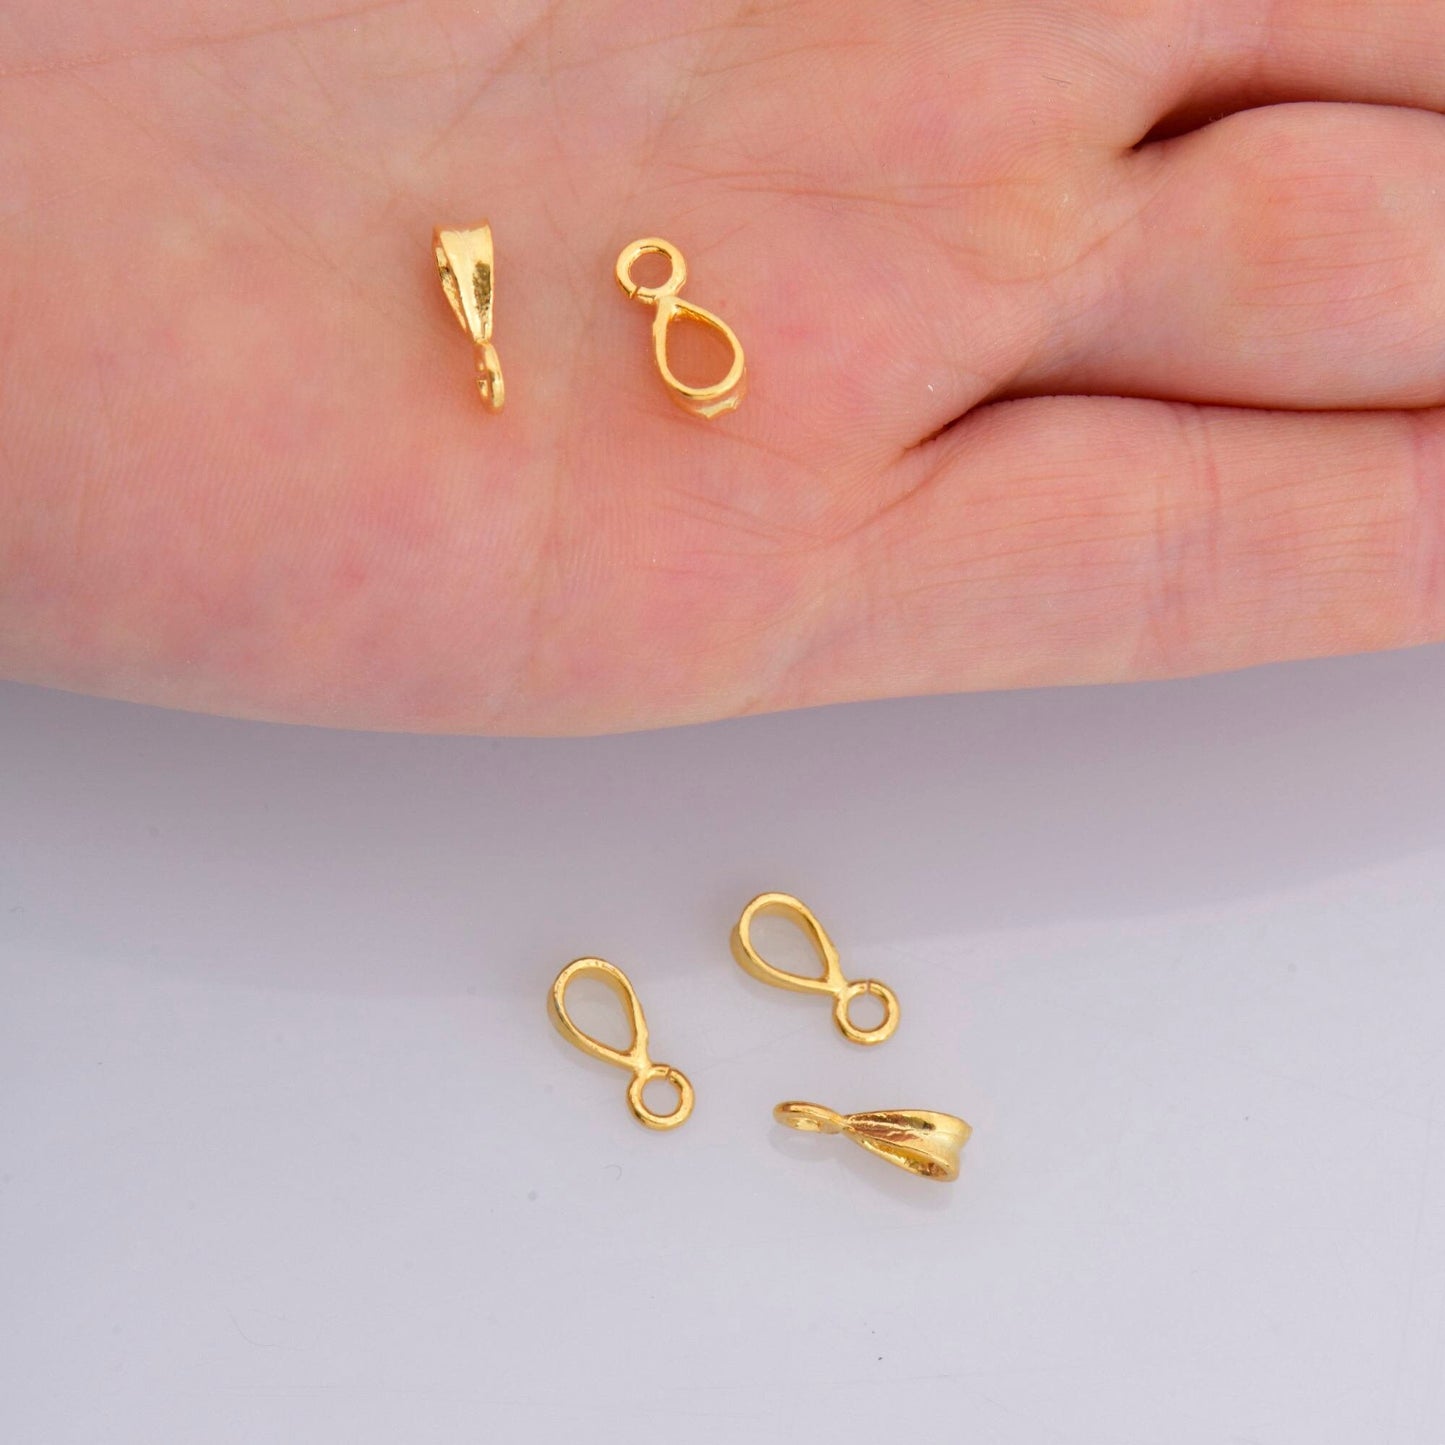 24K Gold Vermeil Bails with Open Loop, 24K Gold Plated Open Loop Bails, Smooth Silver Connector Bails, Bail Charms, Jewelry Findings, M/VM33